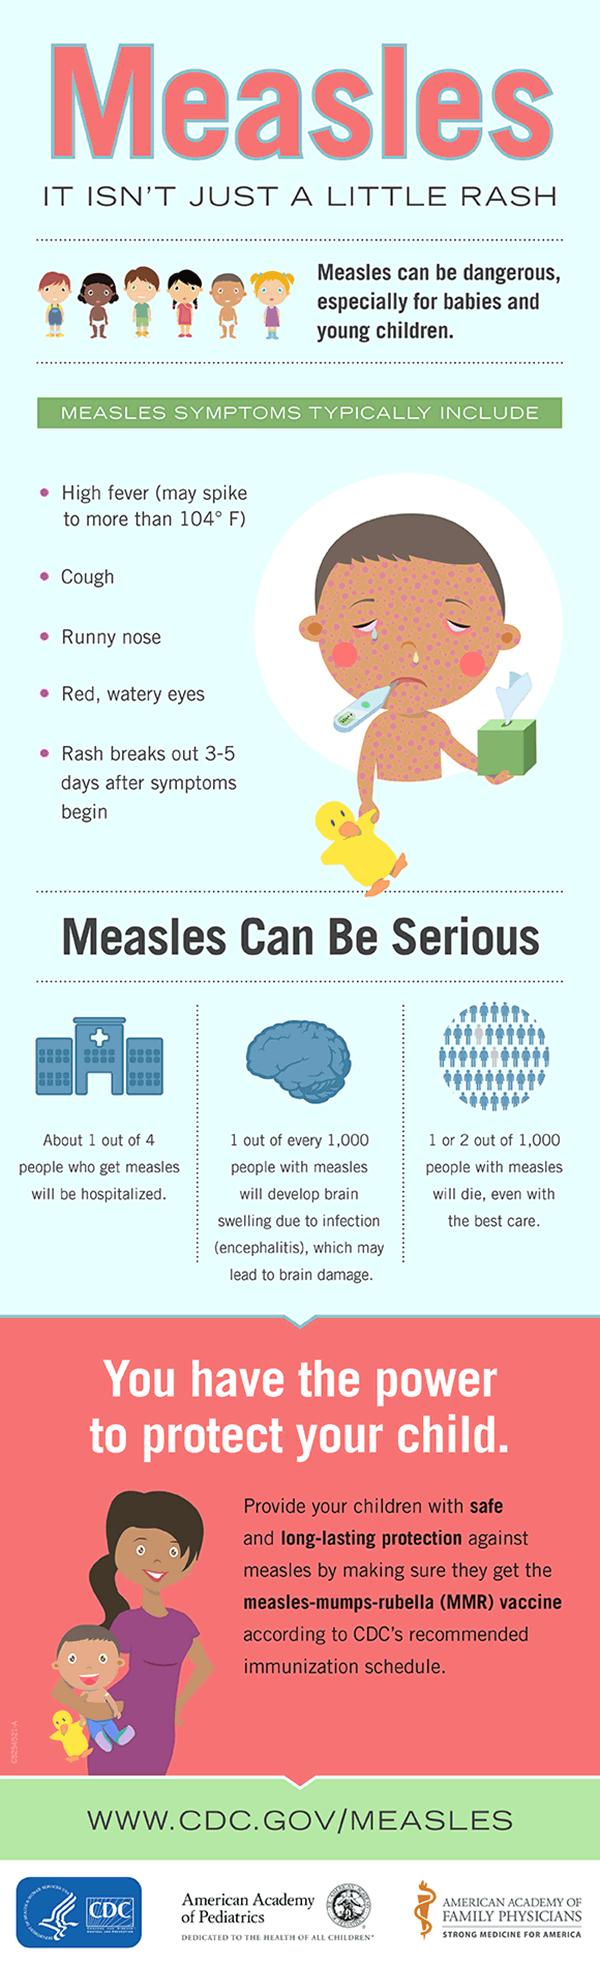 Infographic. Measles: it isn’t just a little rash. Measles can be dangerous, especially for babies and young children. Measles symptoms typically include high fever (may spike to more than 104 degrees F), cough, runny nose, red watery eyes; rash breaks out 3-6 days after symptoms begin. Measles can be serious. About 1 out of 4 people who get measles will be hospitalized. 1 out of every 1,000 people with measles will develop brain swelling (encephalitis), which may lead to brain damage. 1 or 2 out of 1,000 people with measles will die, even with the best care. You have the power to protect your child. Provide your children with safe and long-lasting protection agains measles by making sure they get the measles-mumps-rubella (MMR) vaccine according to CDC’s recommended immunization schedule.